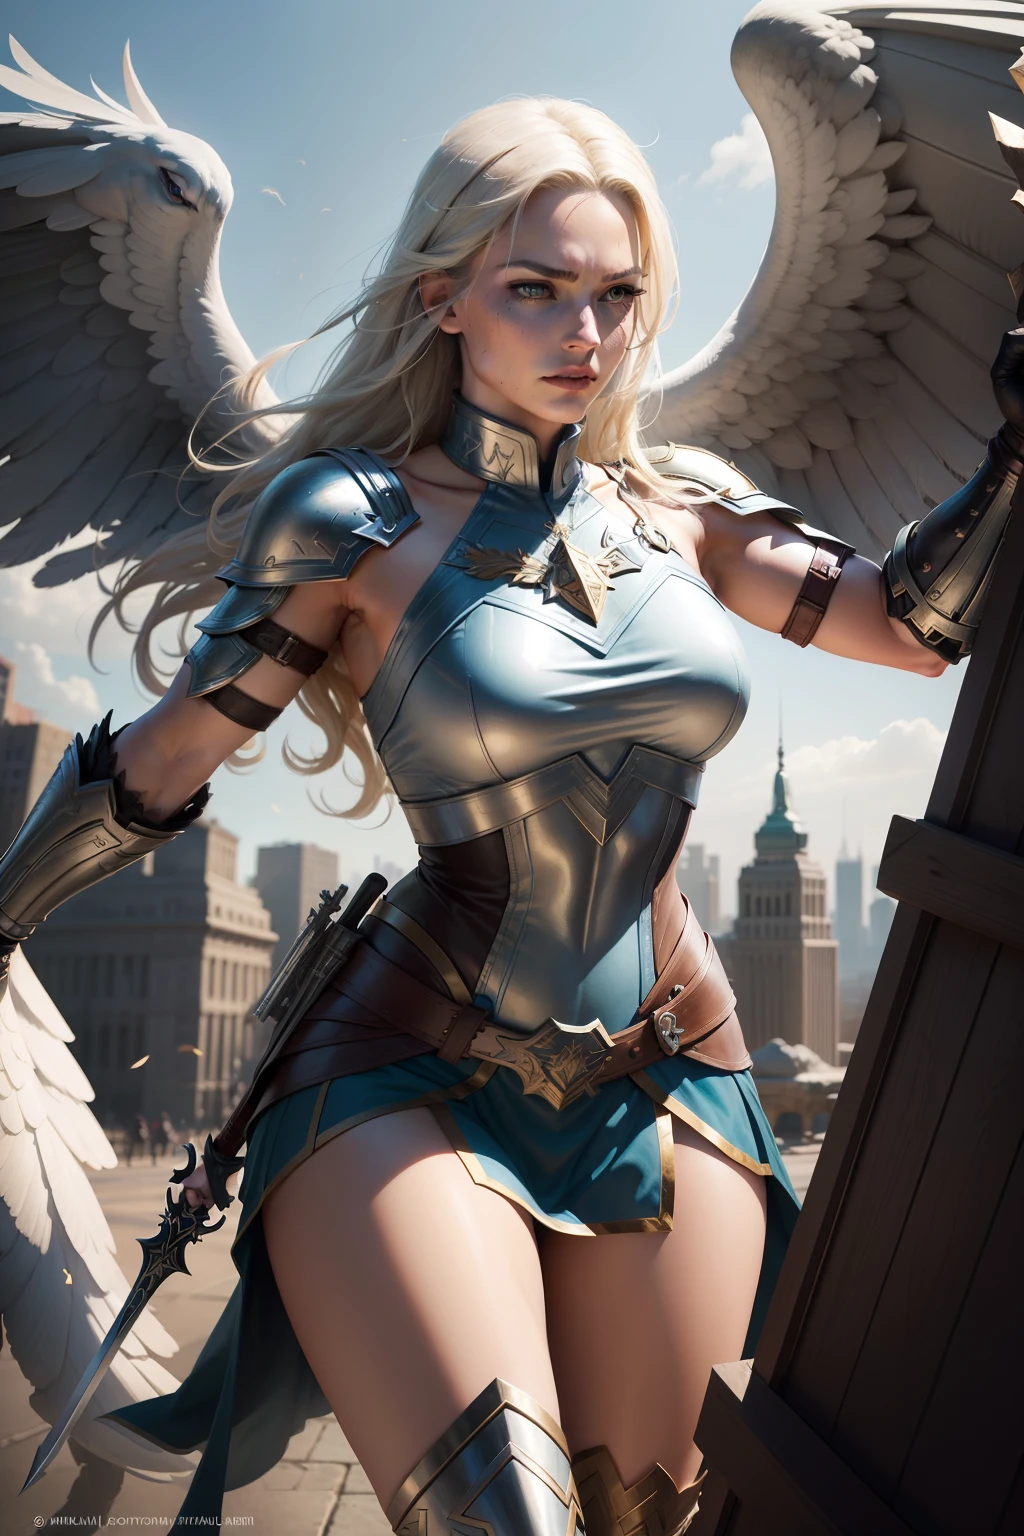 New York, Square of Time, Valkyrie, also known as Brunnhilde, is a character from Marvel Comics. She is an Asgardian warrior and a member of the Valkyries, a group of godlike warriors tasked with escorting the souls of fallen warriors to Valhalla. Valkyrie is skilled in hand-to-hand combat, wielding a sword and riding a majestic (horse) named Pegasus. She possesses superhuman strength, stamina, and longevity due to her Asgardian heritage. Additionally, Valkyrie is notable for her leadership, determination, and loyalty to her fellow Asgardians and the Avengers. Her presence brings a touch of mysticism and heroism to the mythology of the Marvel Universe. (best quality: 1.0), (Ultra Highres: 1.0), highly detailed face and eyes, (photorealistic: 1.2)